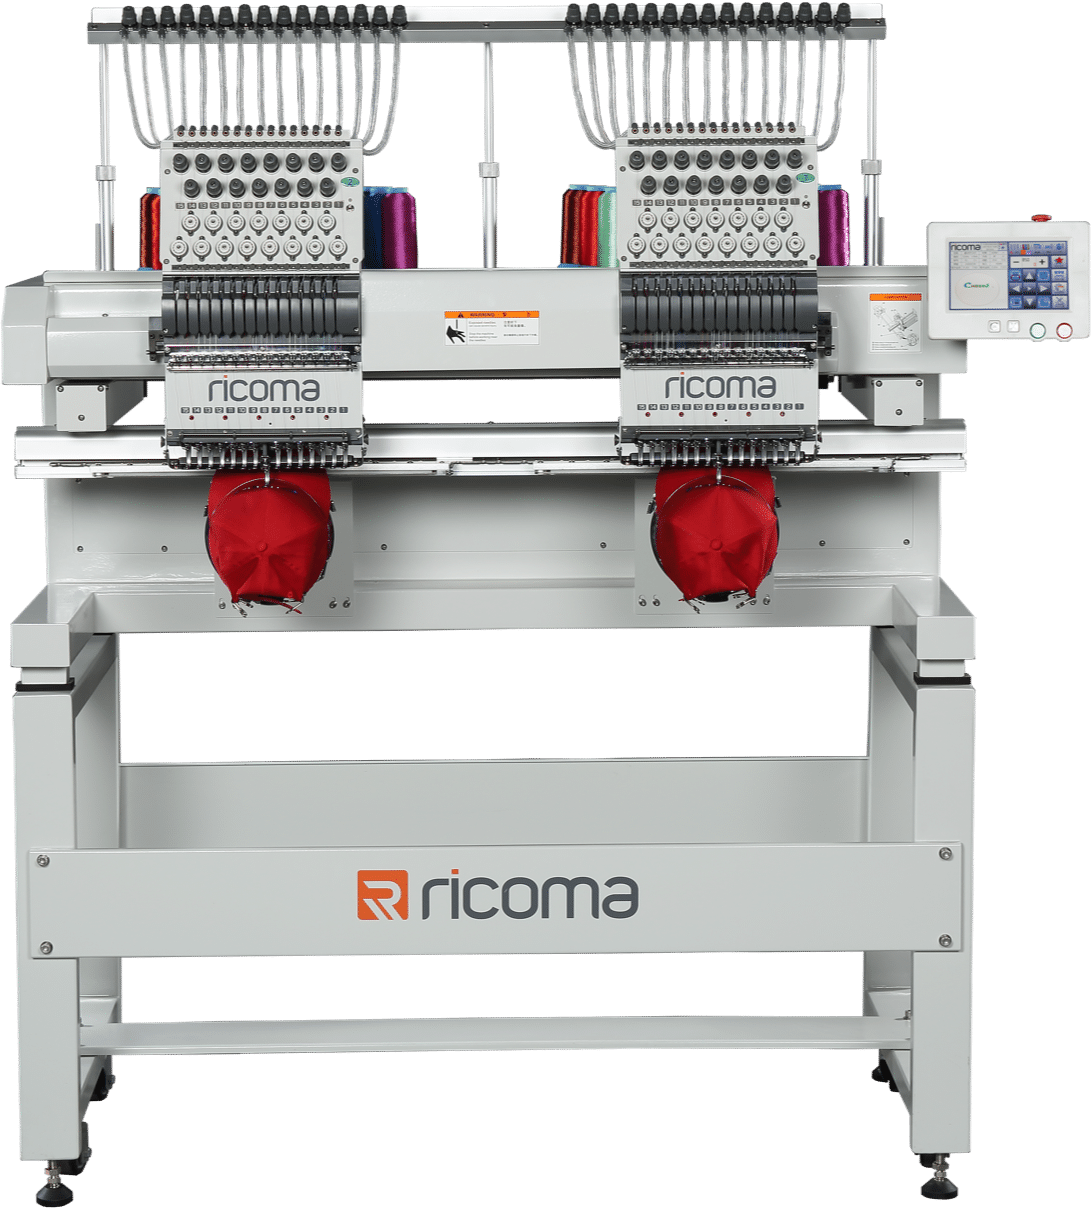 Ricoma MT-1502 Embroidery Machine Review